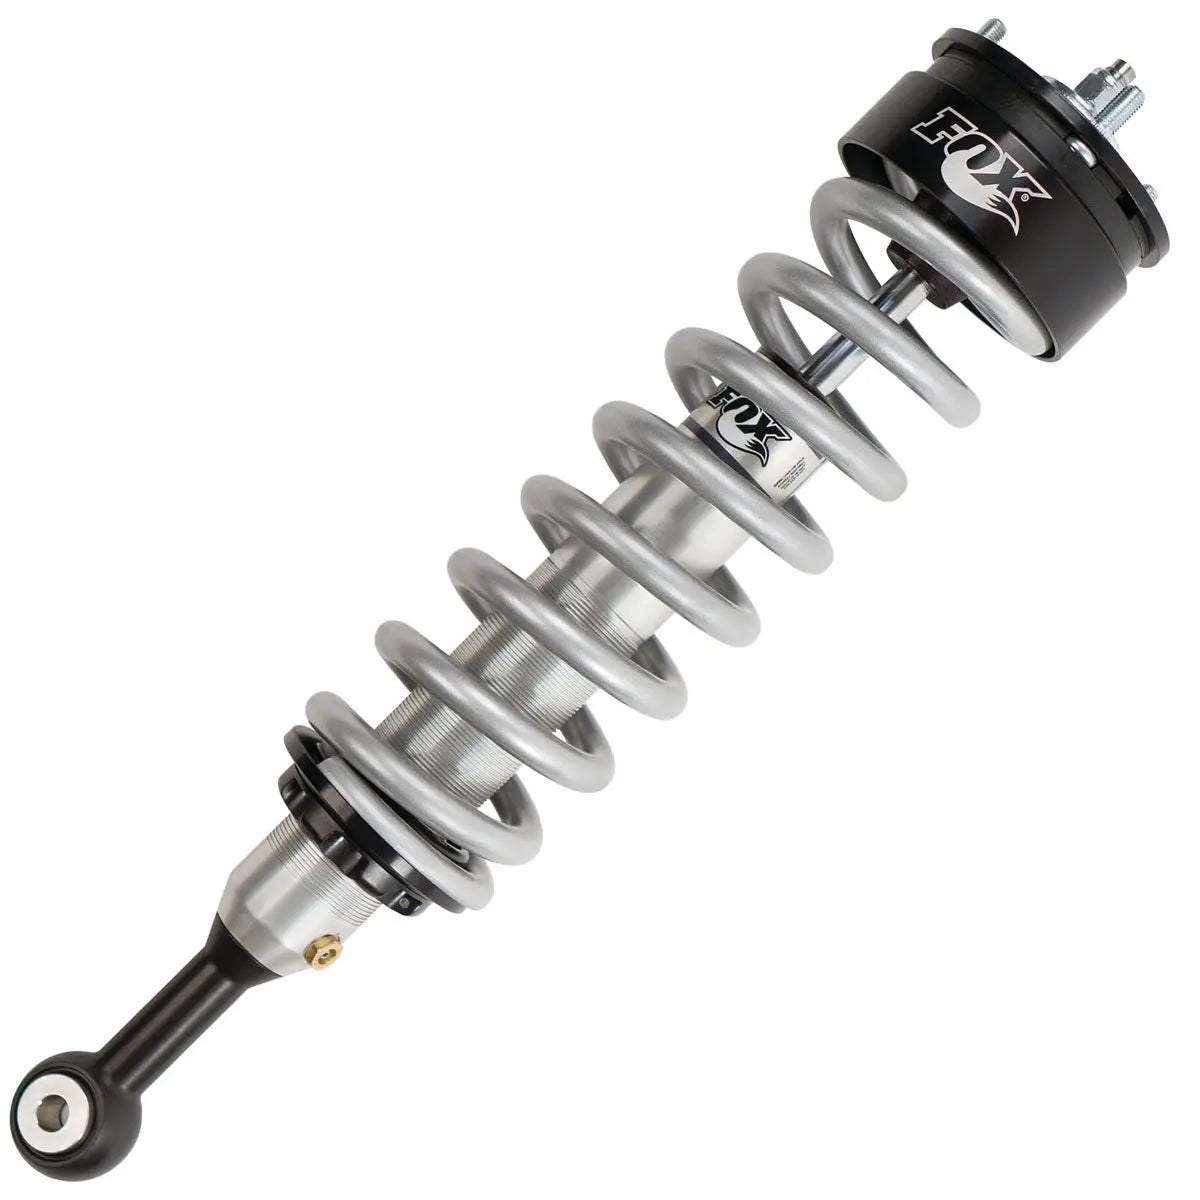 Fox 2.0 IFP Coil-Over Shocks for 05+ Toyota Tacoma, 07-09 FJ Cruiser, Front, 4.6" Travel, 0-2" Lift - Wheel Every Weekend